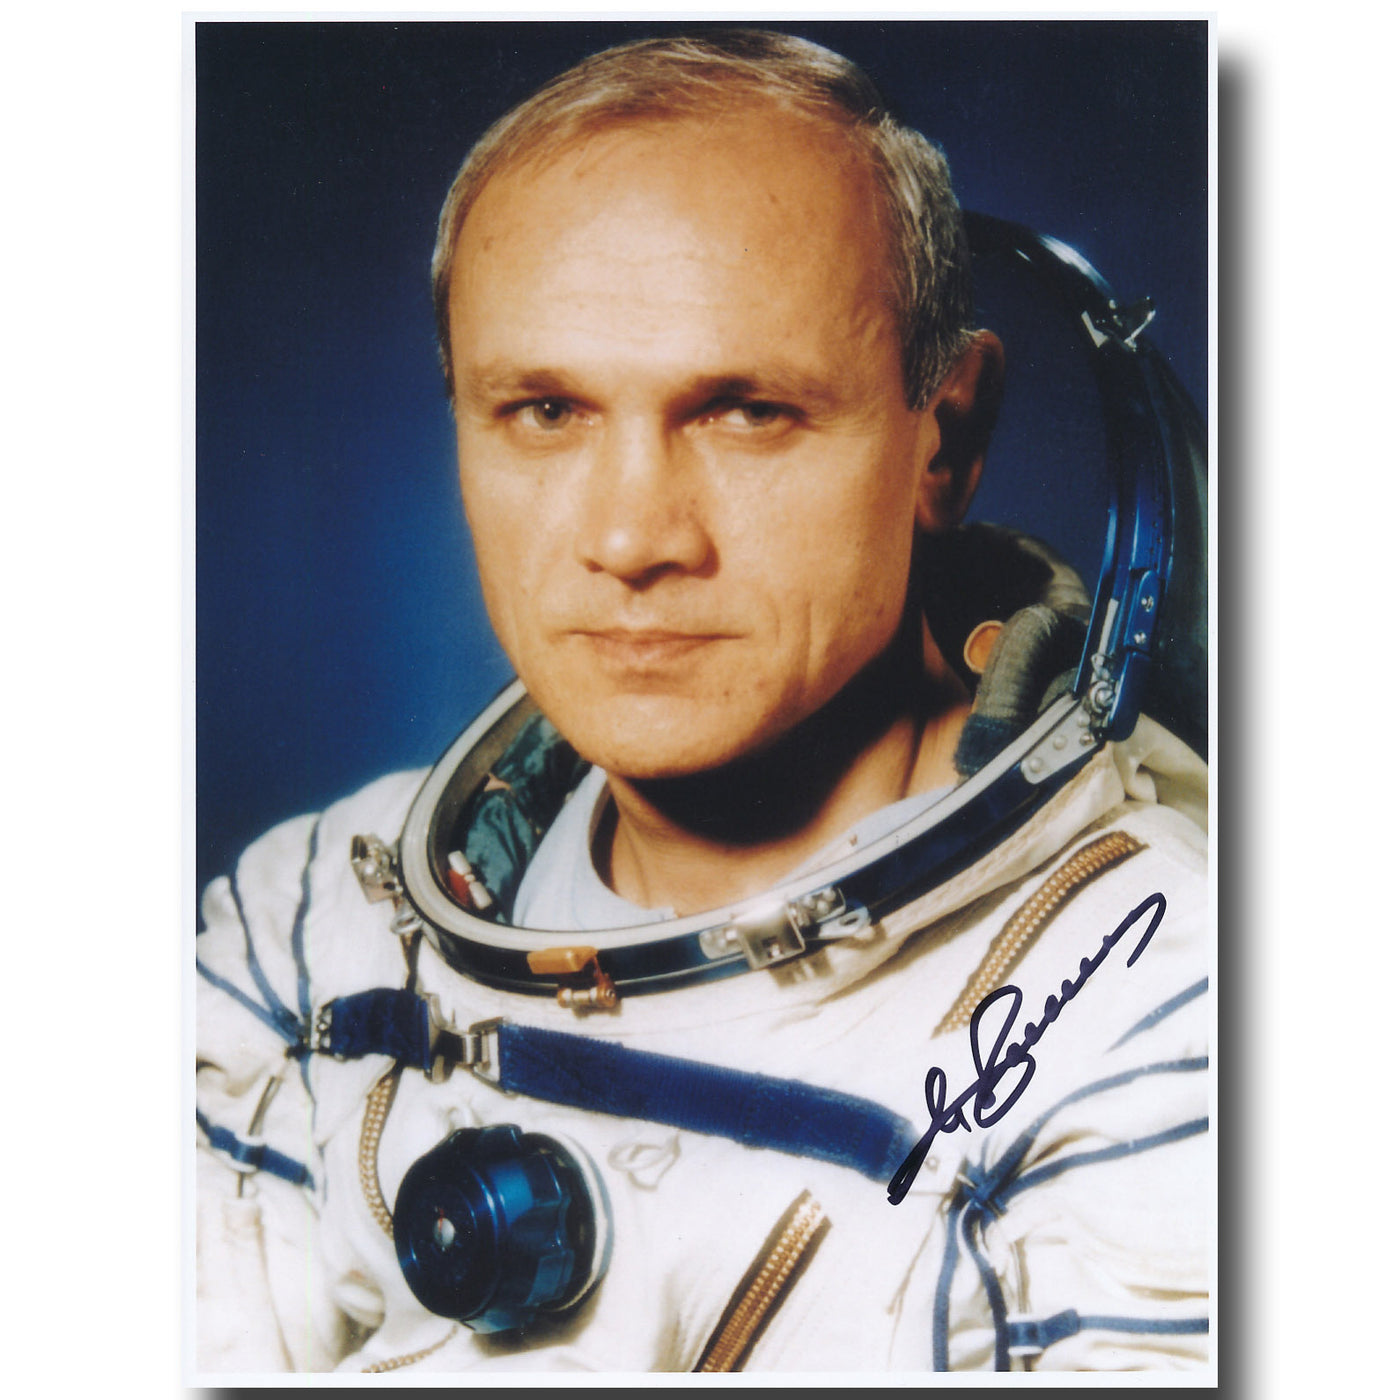 In-person signed 8x10 glossy portrait of famous Russian cosmonaut Vladimir Dzhanibekov who saved the Salyut space station!